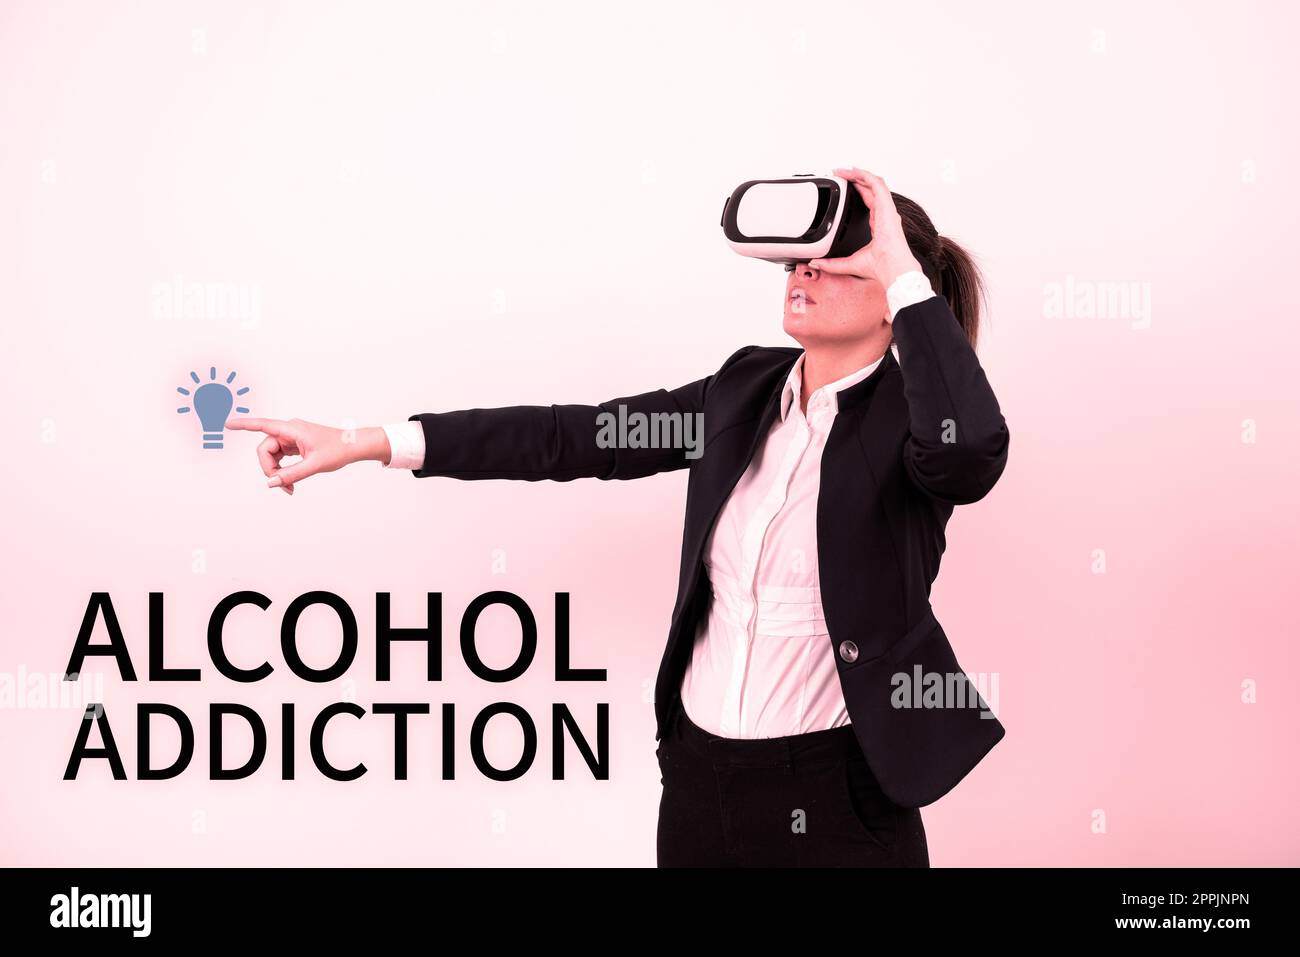 Text sign showing Alcohol Addiction. Concept meaning characterized by frequent and excessive consumption of alcoholic beverages Stock Photo